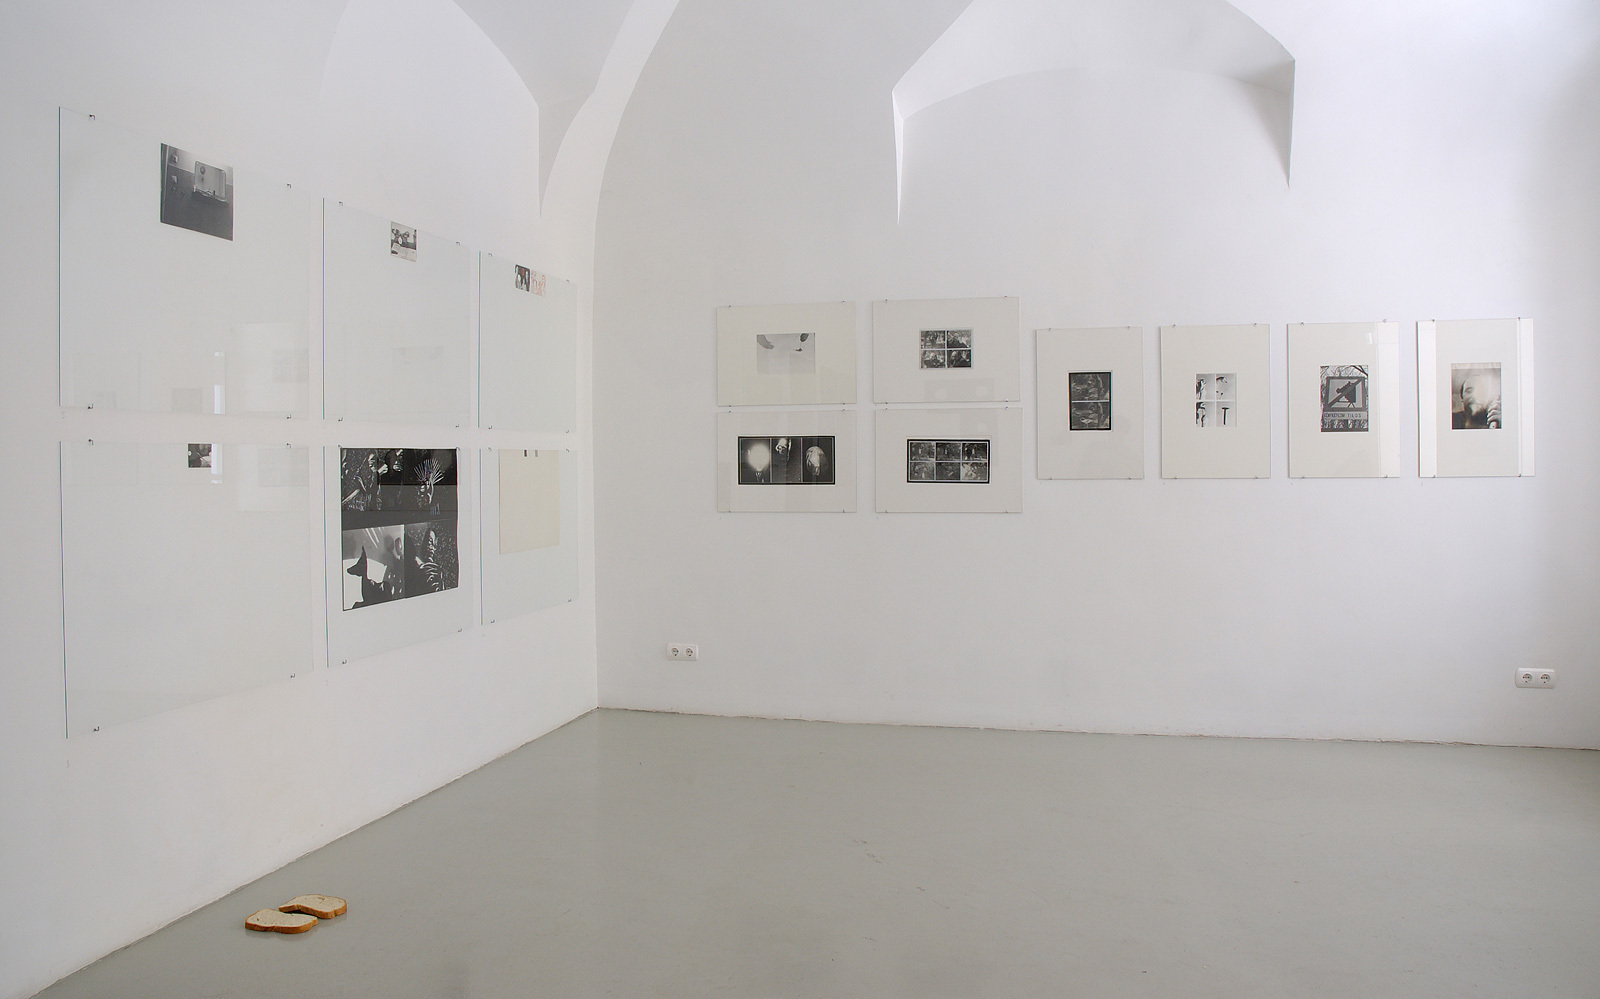 Installation view with works of Miklós ERDÉLY and the INDIGO GROUP, Kisterem, 2008